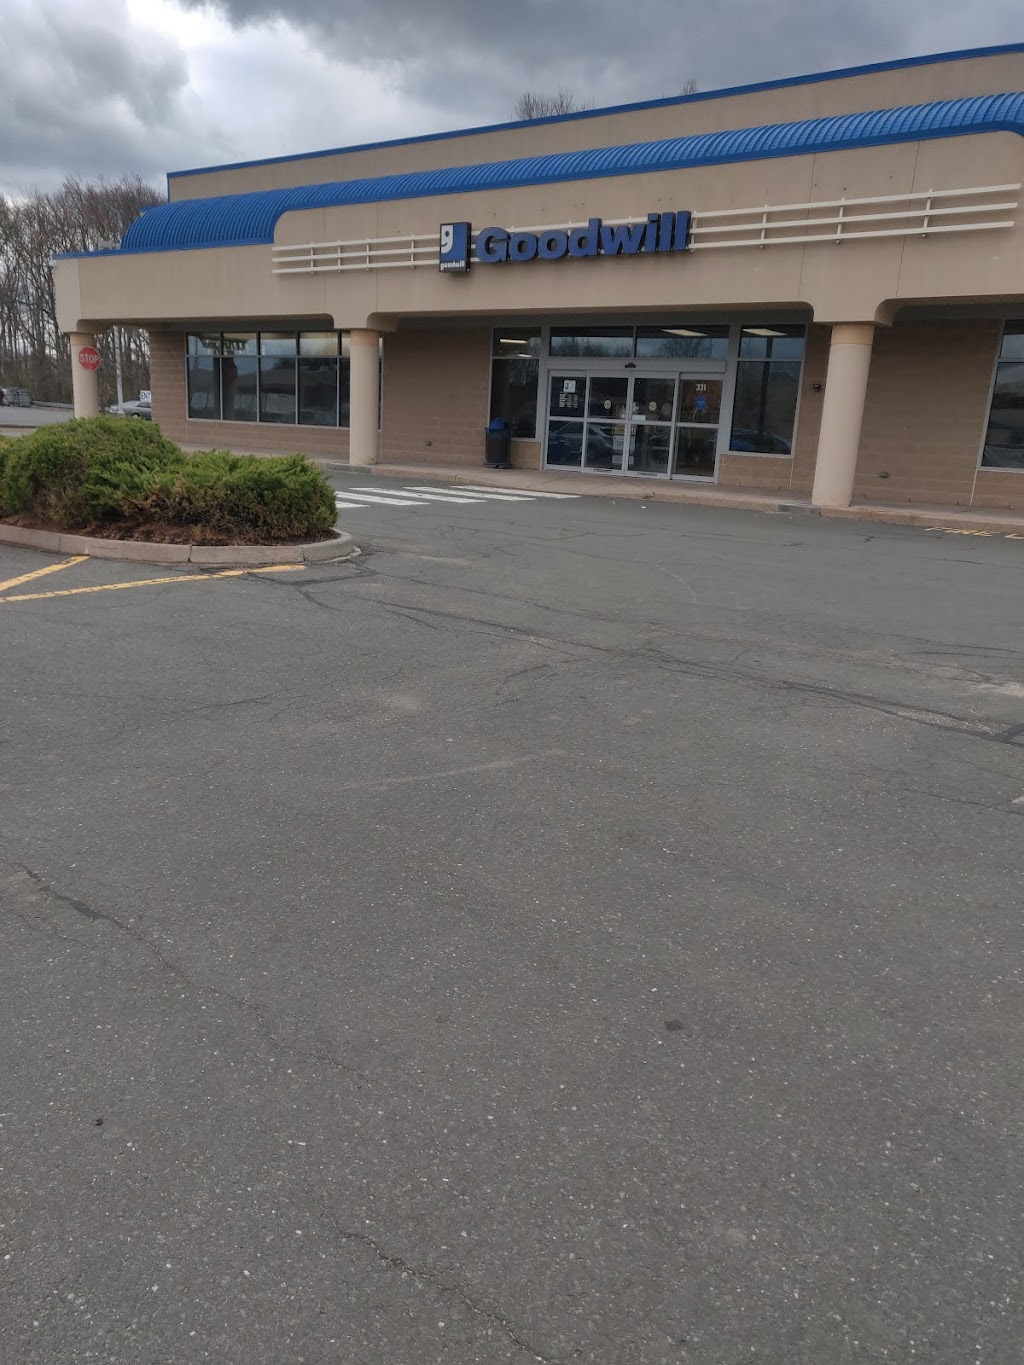 Goodwill Bloomfield Store & Donation Station | 331 Cottage Grove Rd, Bloomfield, CT 06002 | Phone: (860) 969-5514